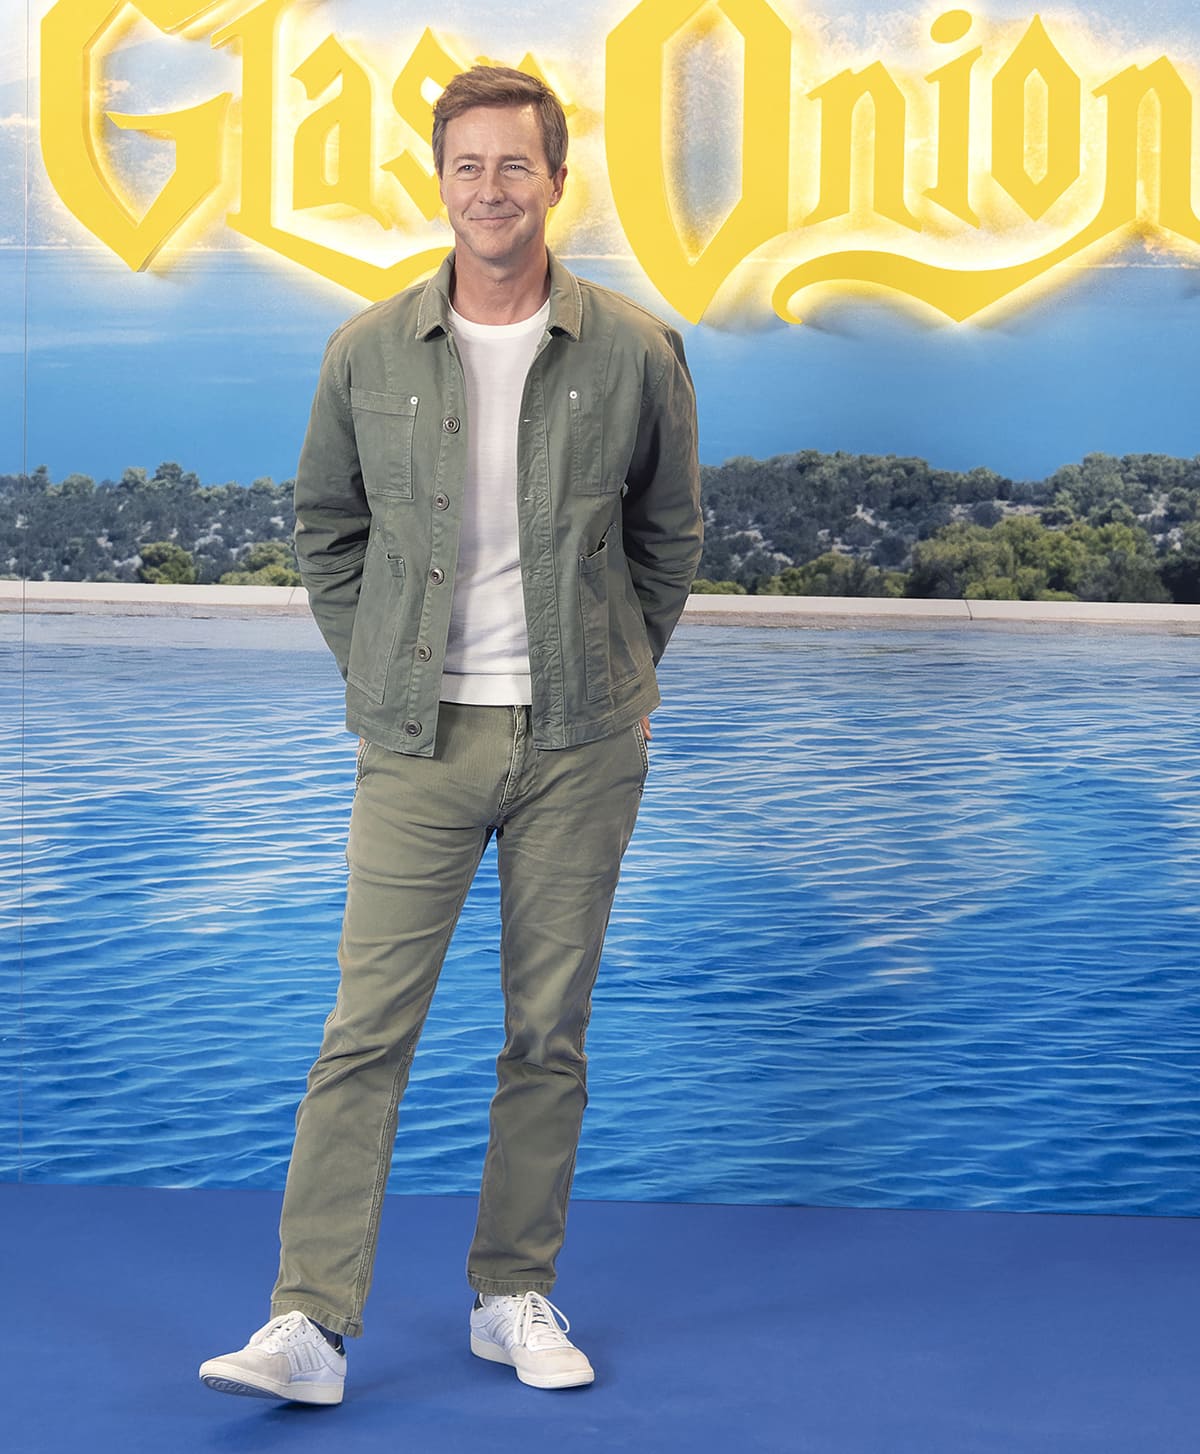 Edward Norton looks handsome in a relaxed khaki denim jacket, khaki jeans, and white sneakers